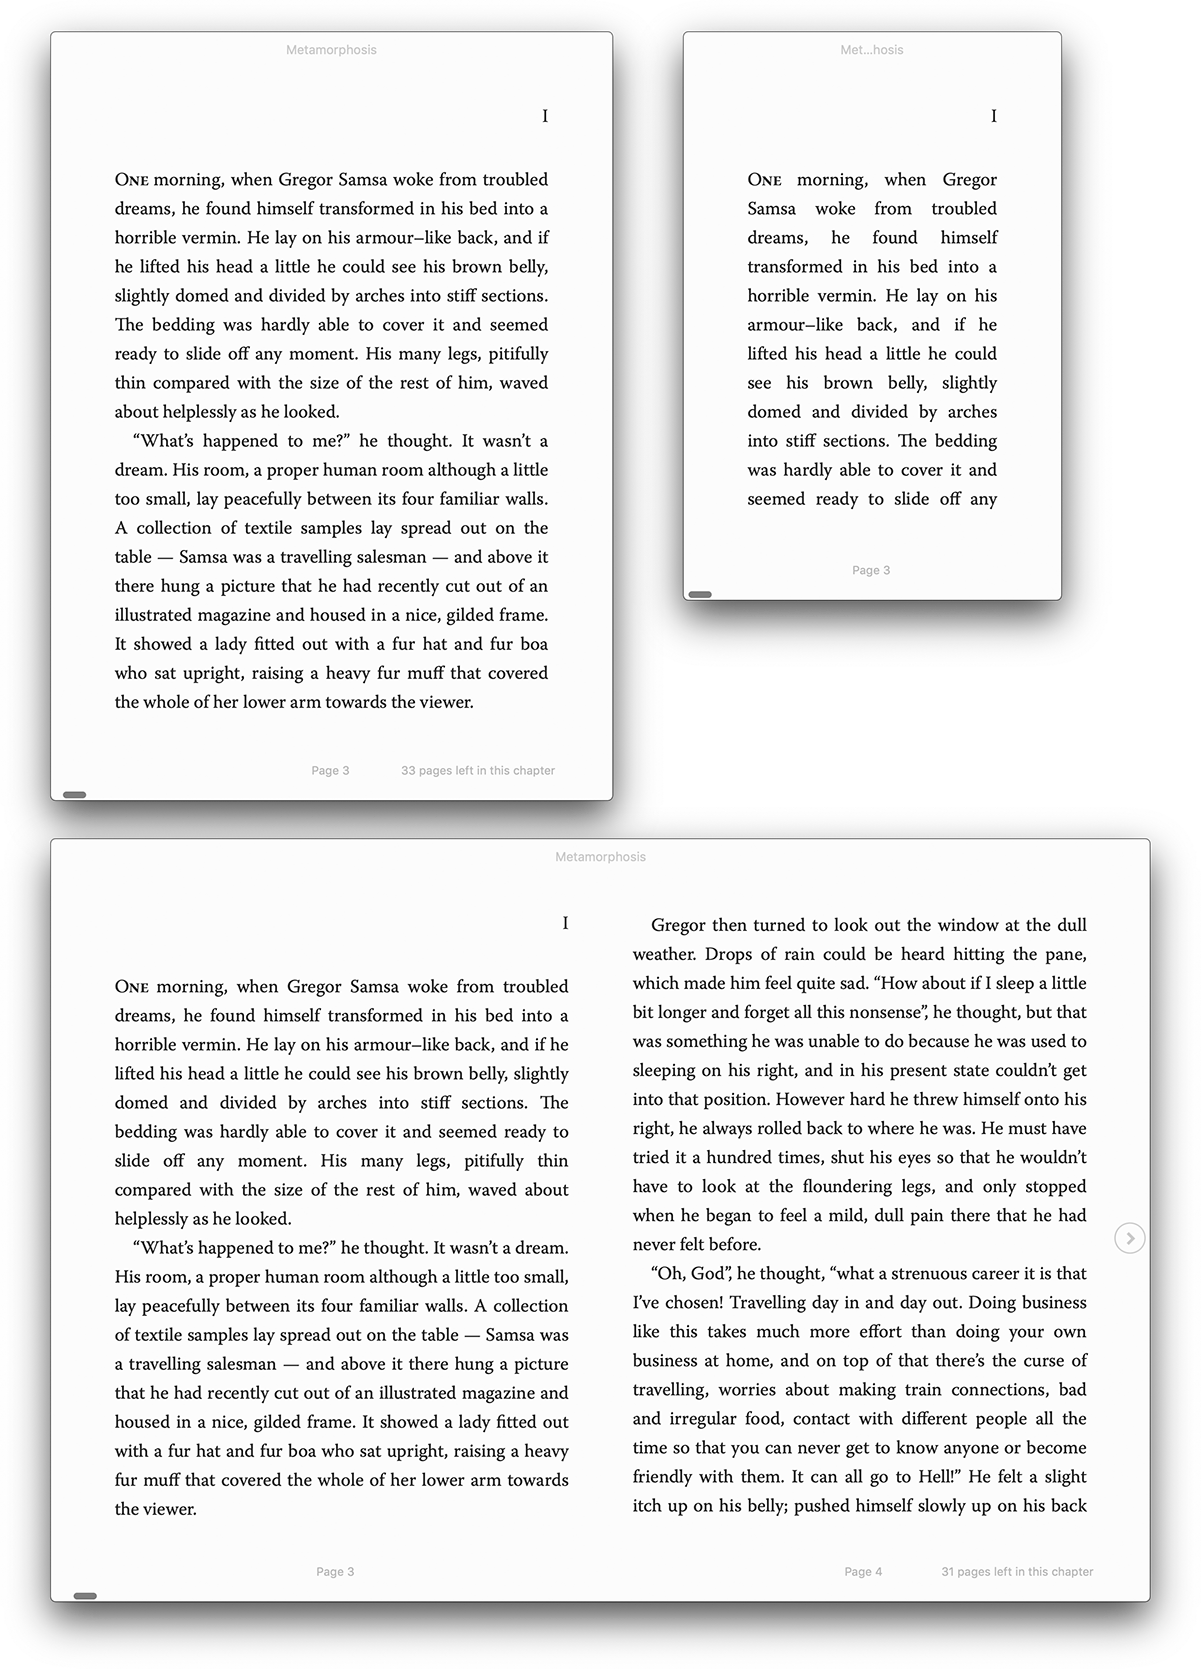 Example of a reflowable ebook